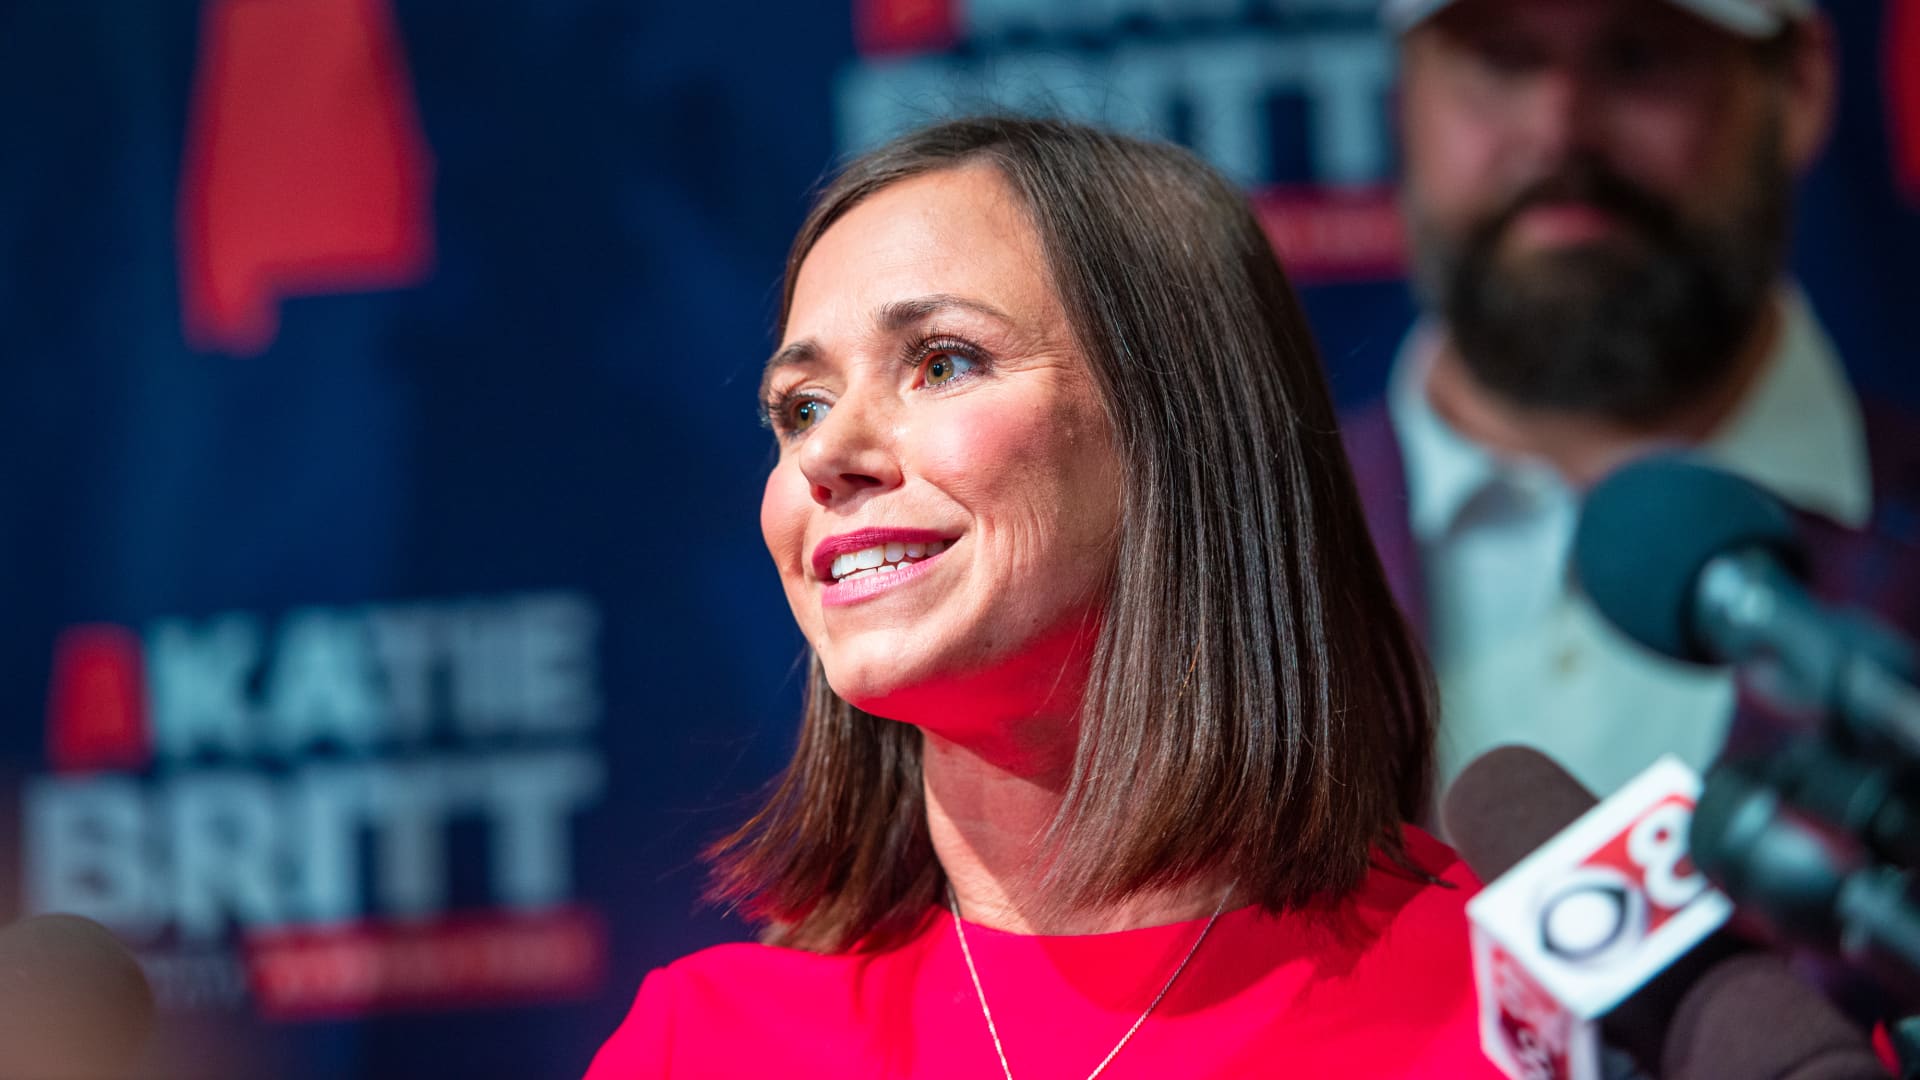 Katie Britt, US Republican Senate candidate for Alabama, during an election night watch event in Montgomery, Alabama, US, on Tuesday, May 24, 2022.